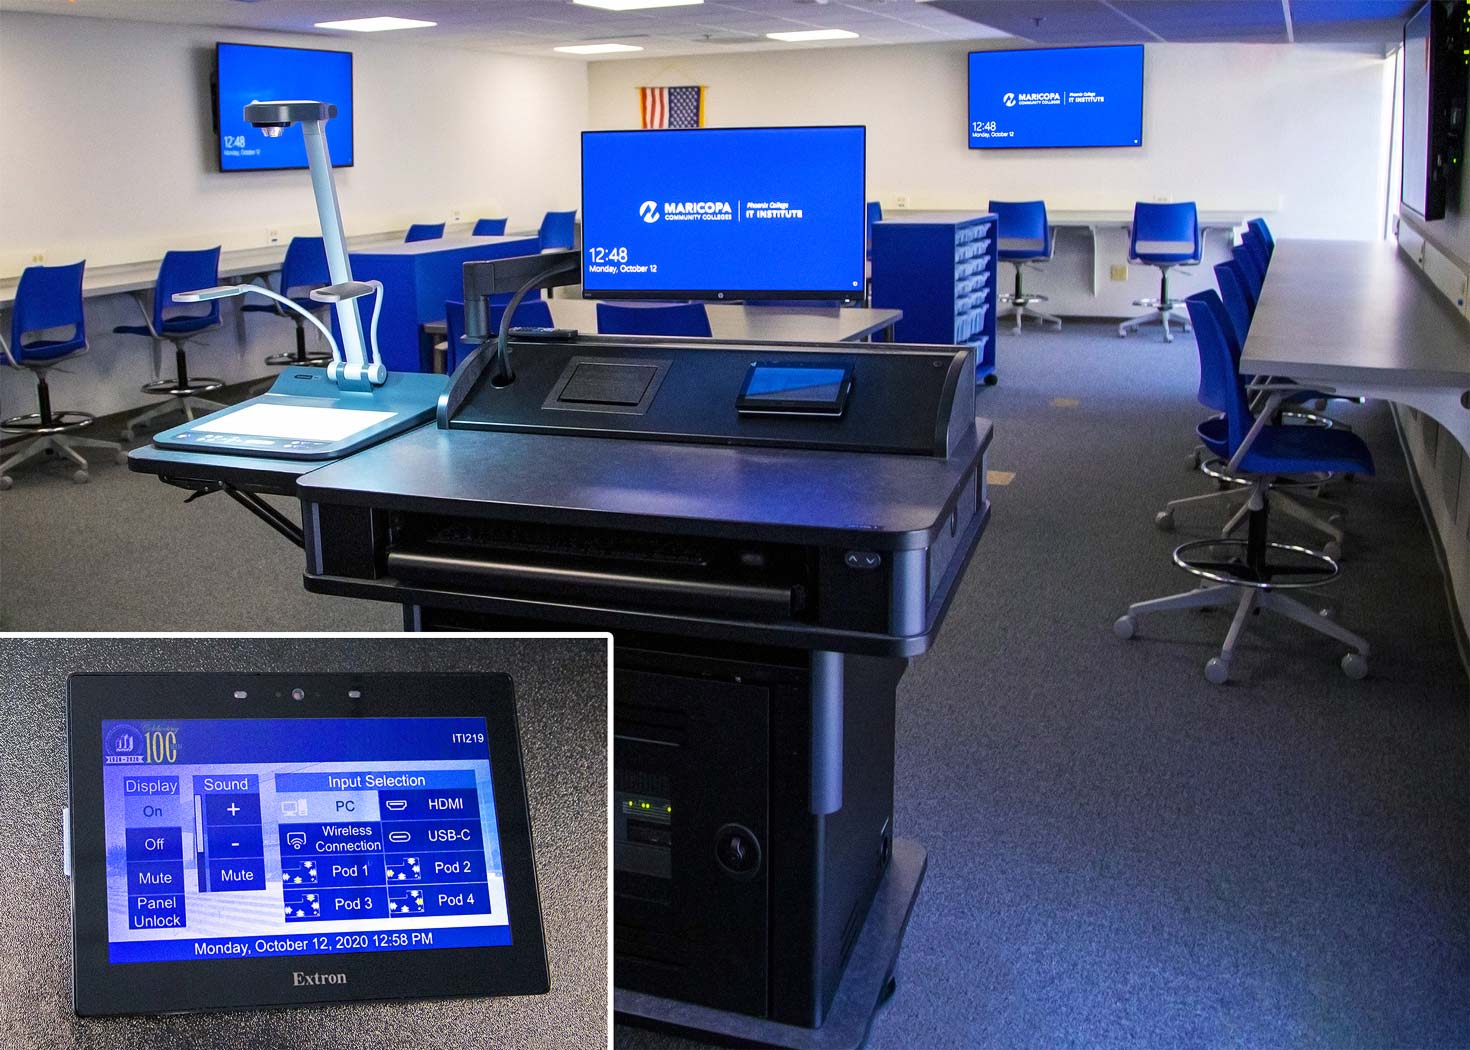 Instructor AV Podium in A+ Classroom. Students learn how to build and repair computer equipment on the workbenches lining the walls. Flat panel displays provide instruction to guide students working on projects. Inset: user interface displayed on podium touchpanel.